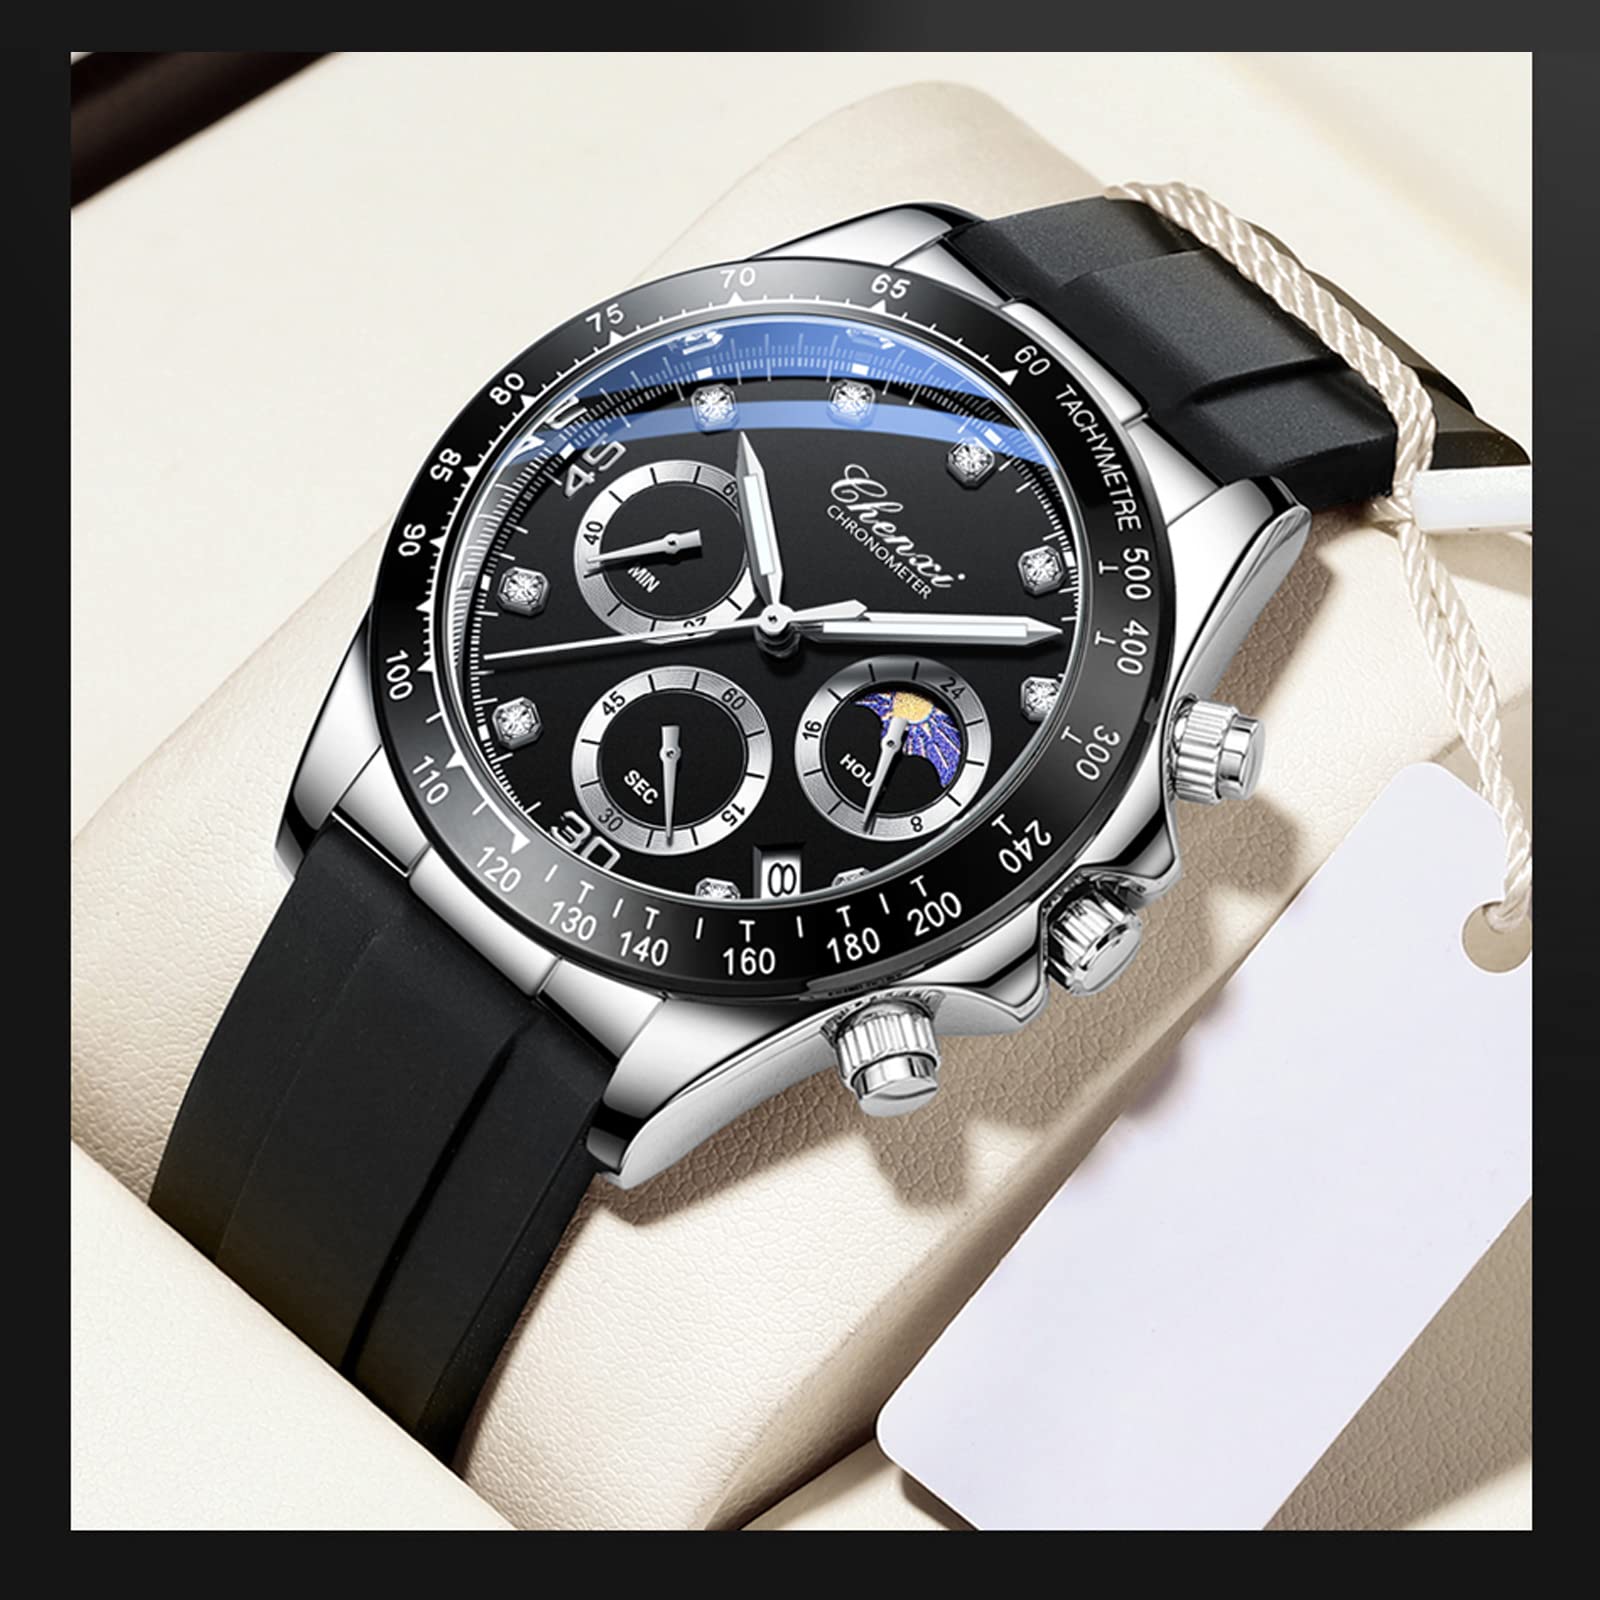 Tiong Mens Watches Automatic Date Quartz Stainless Steel Watch Chronograph Business Fashion Wrist Watches for Men